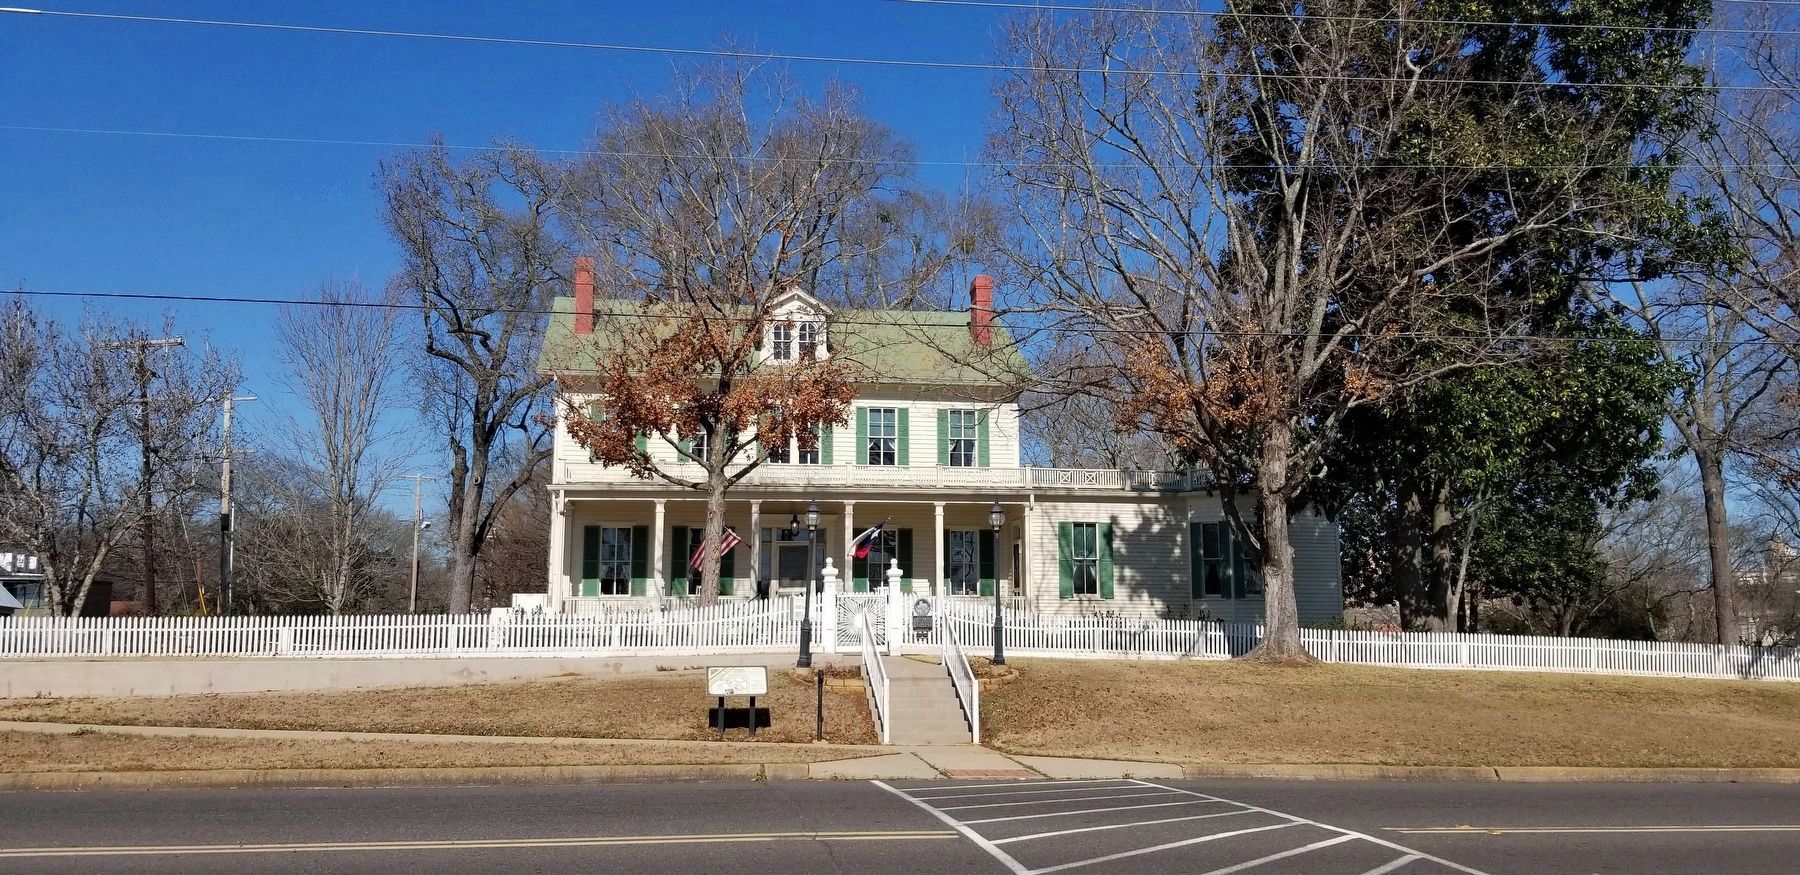 The view of the Starr Family Home and marker (left side) from the street image. Click for full size.